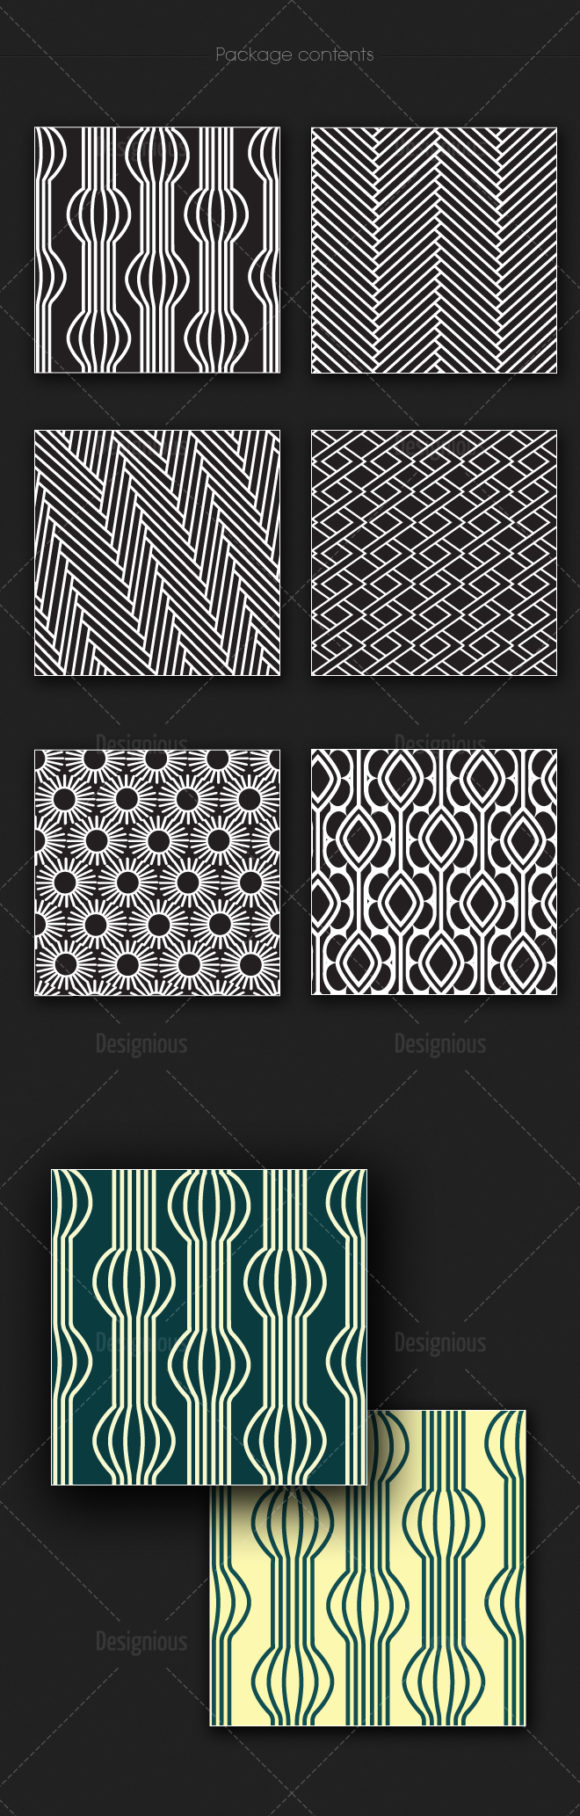 Seamless Patterns Vector Pack 174 2